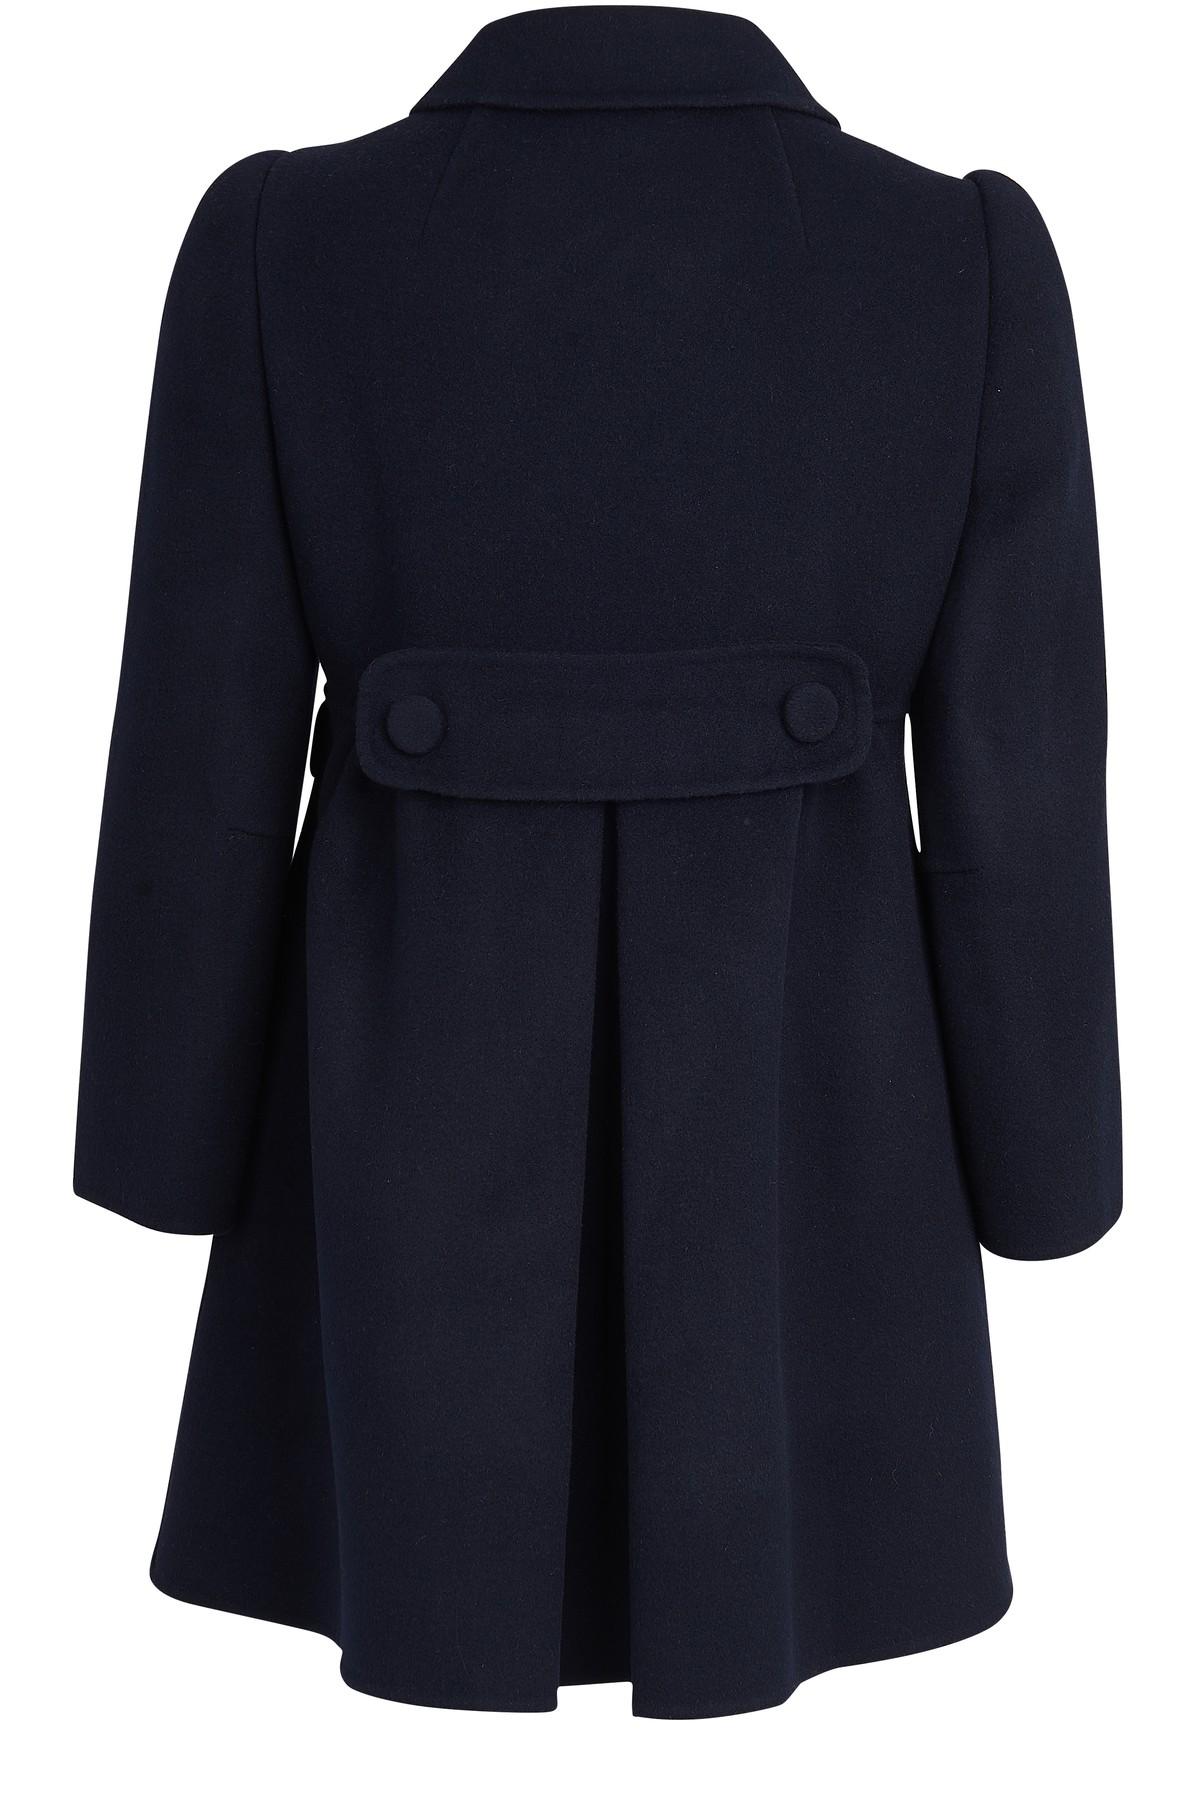 Blue Womens Coats Marc Jacobs Coats Marc Jacobs Double Breasted Girls Coat in Dark_navy 